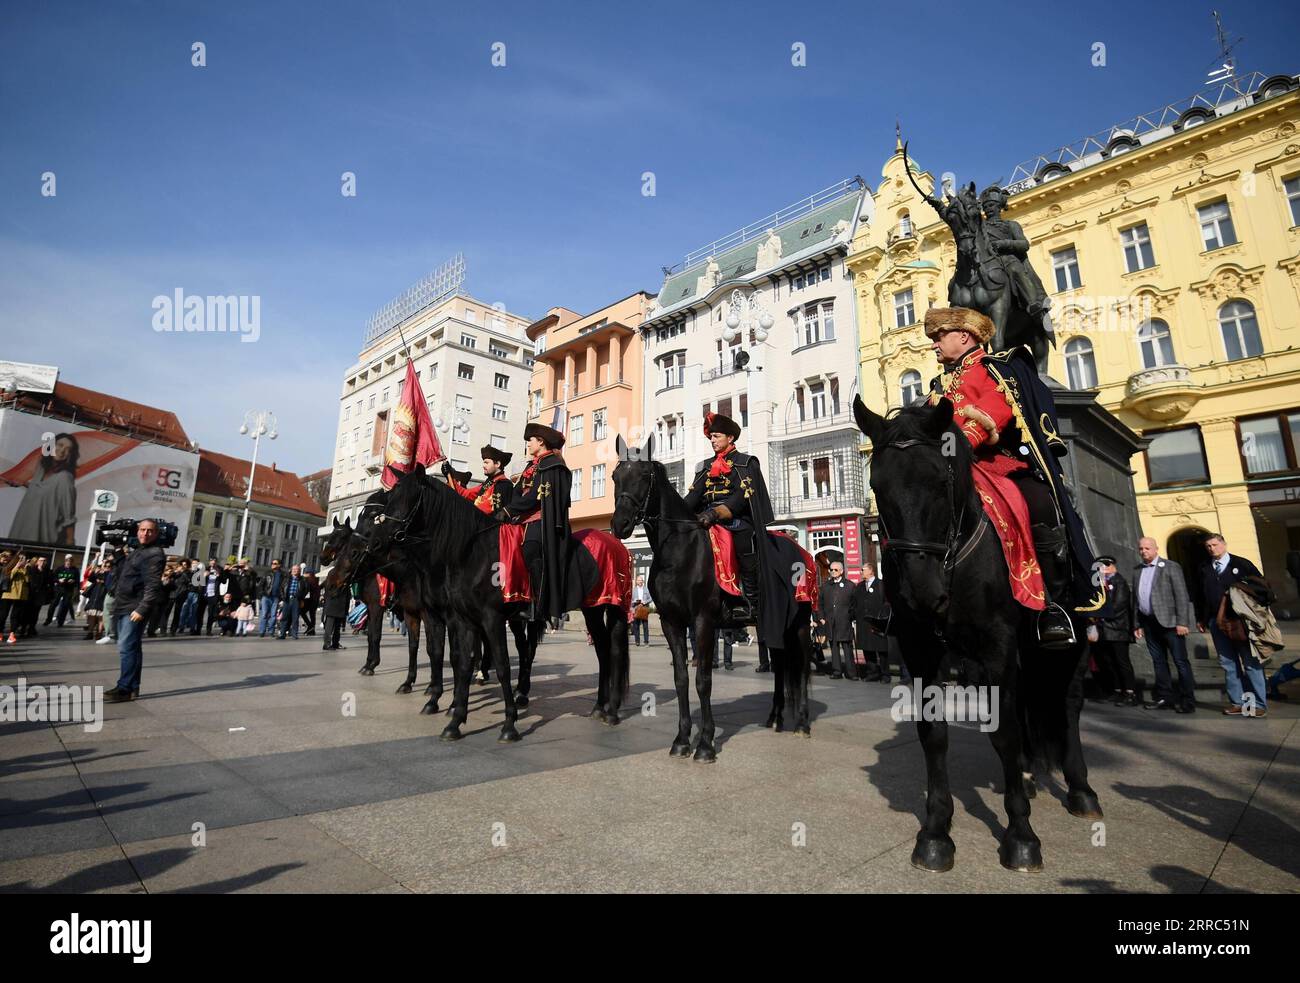 211018 -- ZAGREB, Oct. 18, 2021 -- Soldiers in traditional military uniforms perform in the Cravat Day celebration in Zagreb, Croatia, on Oct. 18, 2021. Croatians celebrate World Cravat Day on Oct. 18 every year. The Cravat, symbol of culture and style, originated from the red neck scarves worn by Croatian soldiers serving in France in the 17th century. /Pixsell via Xinhua CROATIA-ZAGREB-CRAVAT DAY MarkoxLukunic PUBLICATIONxNOTxINxCHN Stock Photo